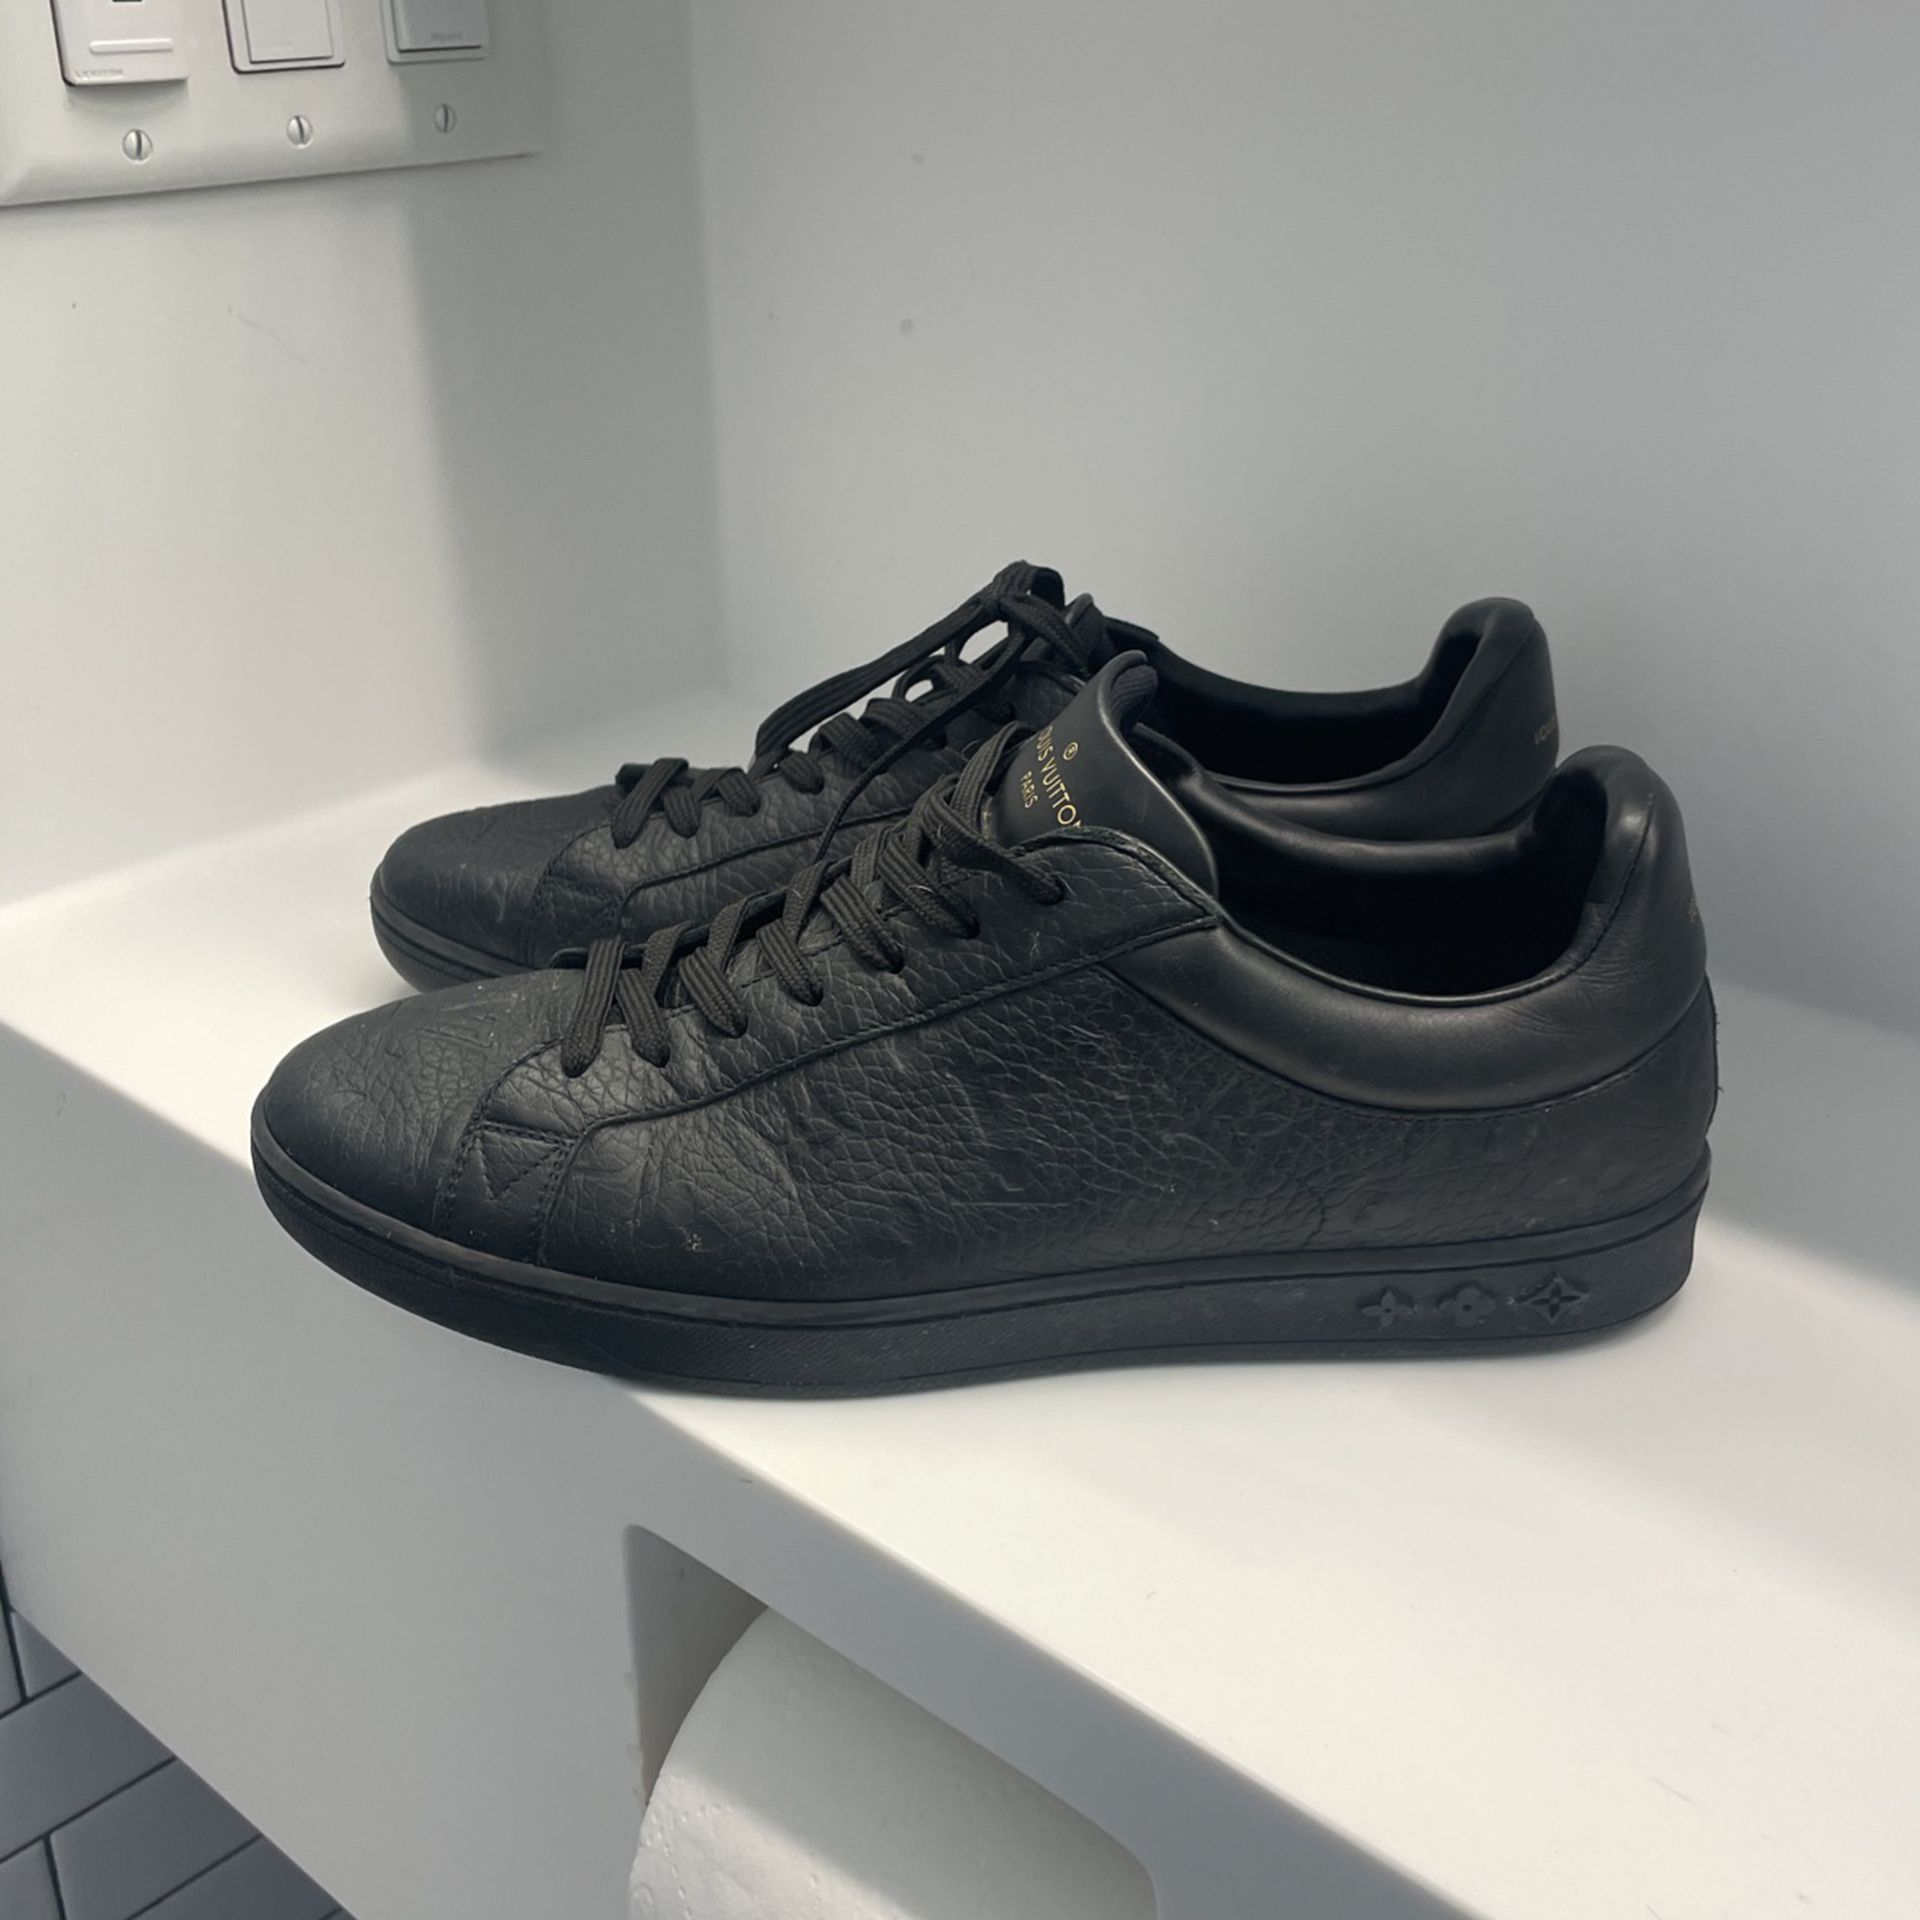 Louis Vuitton, Shoes, Luxembourg Sneaker